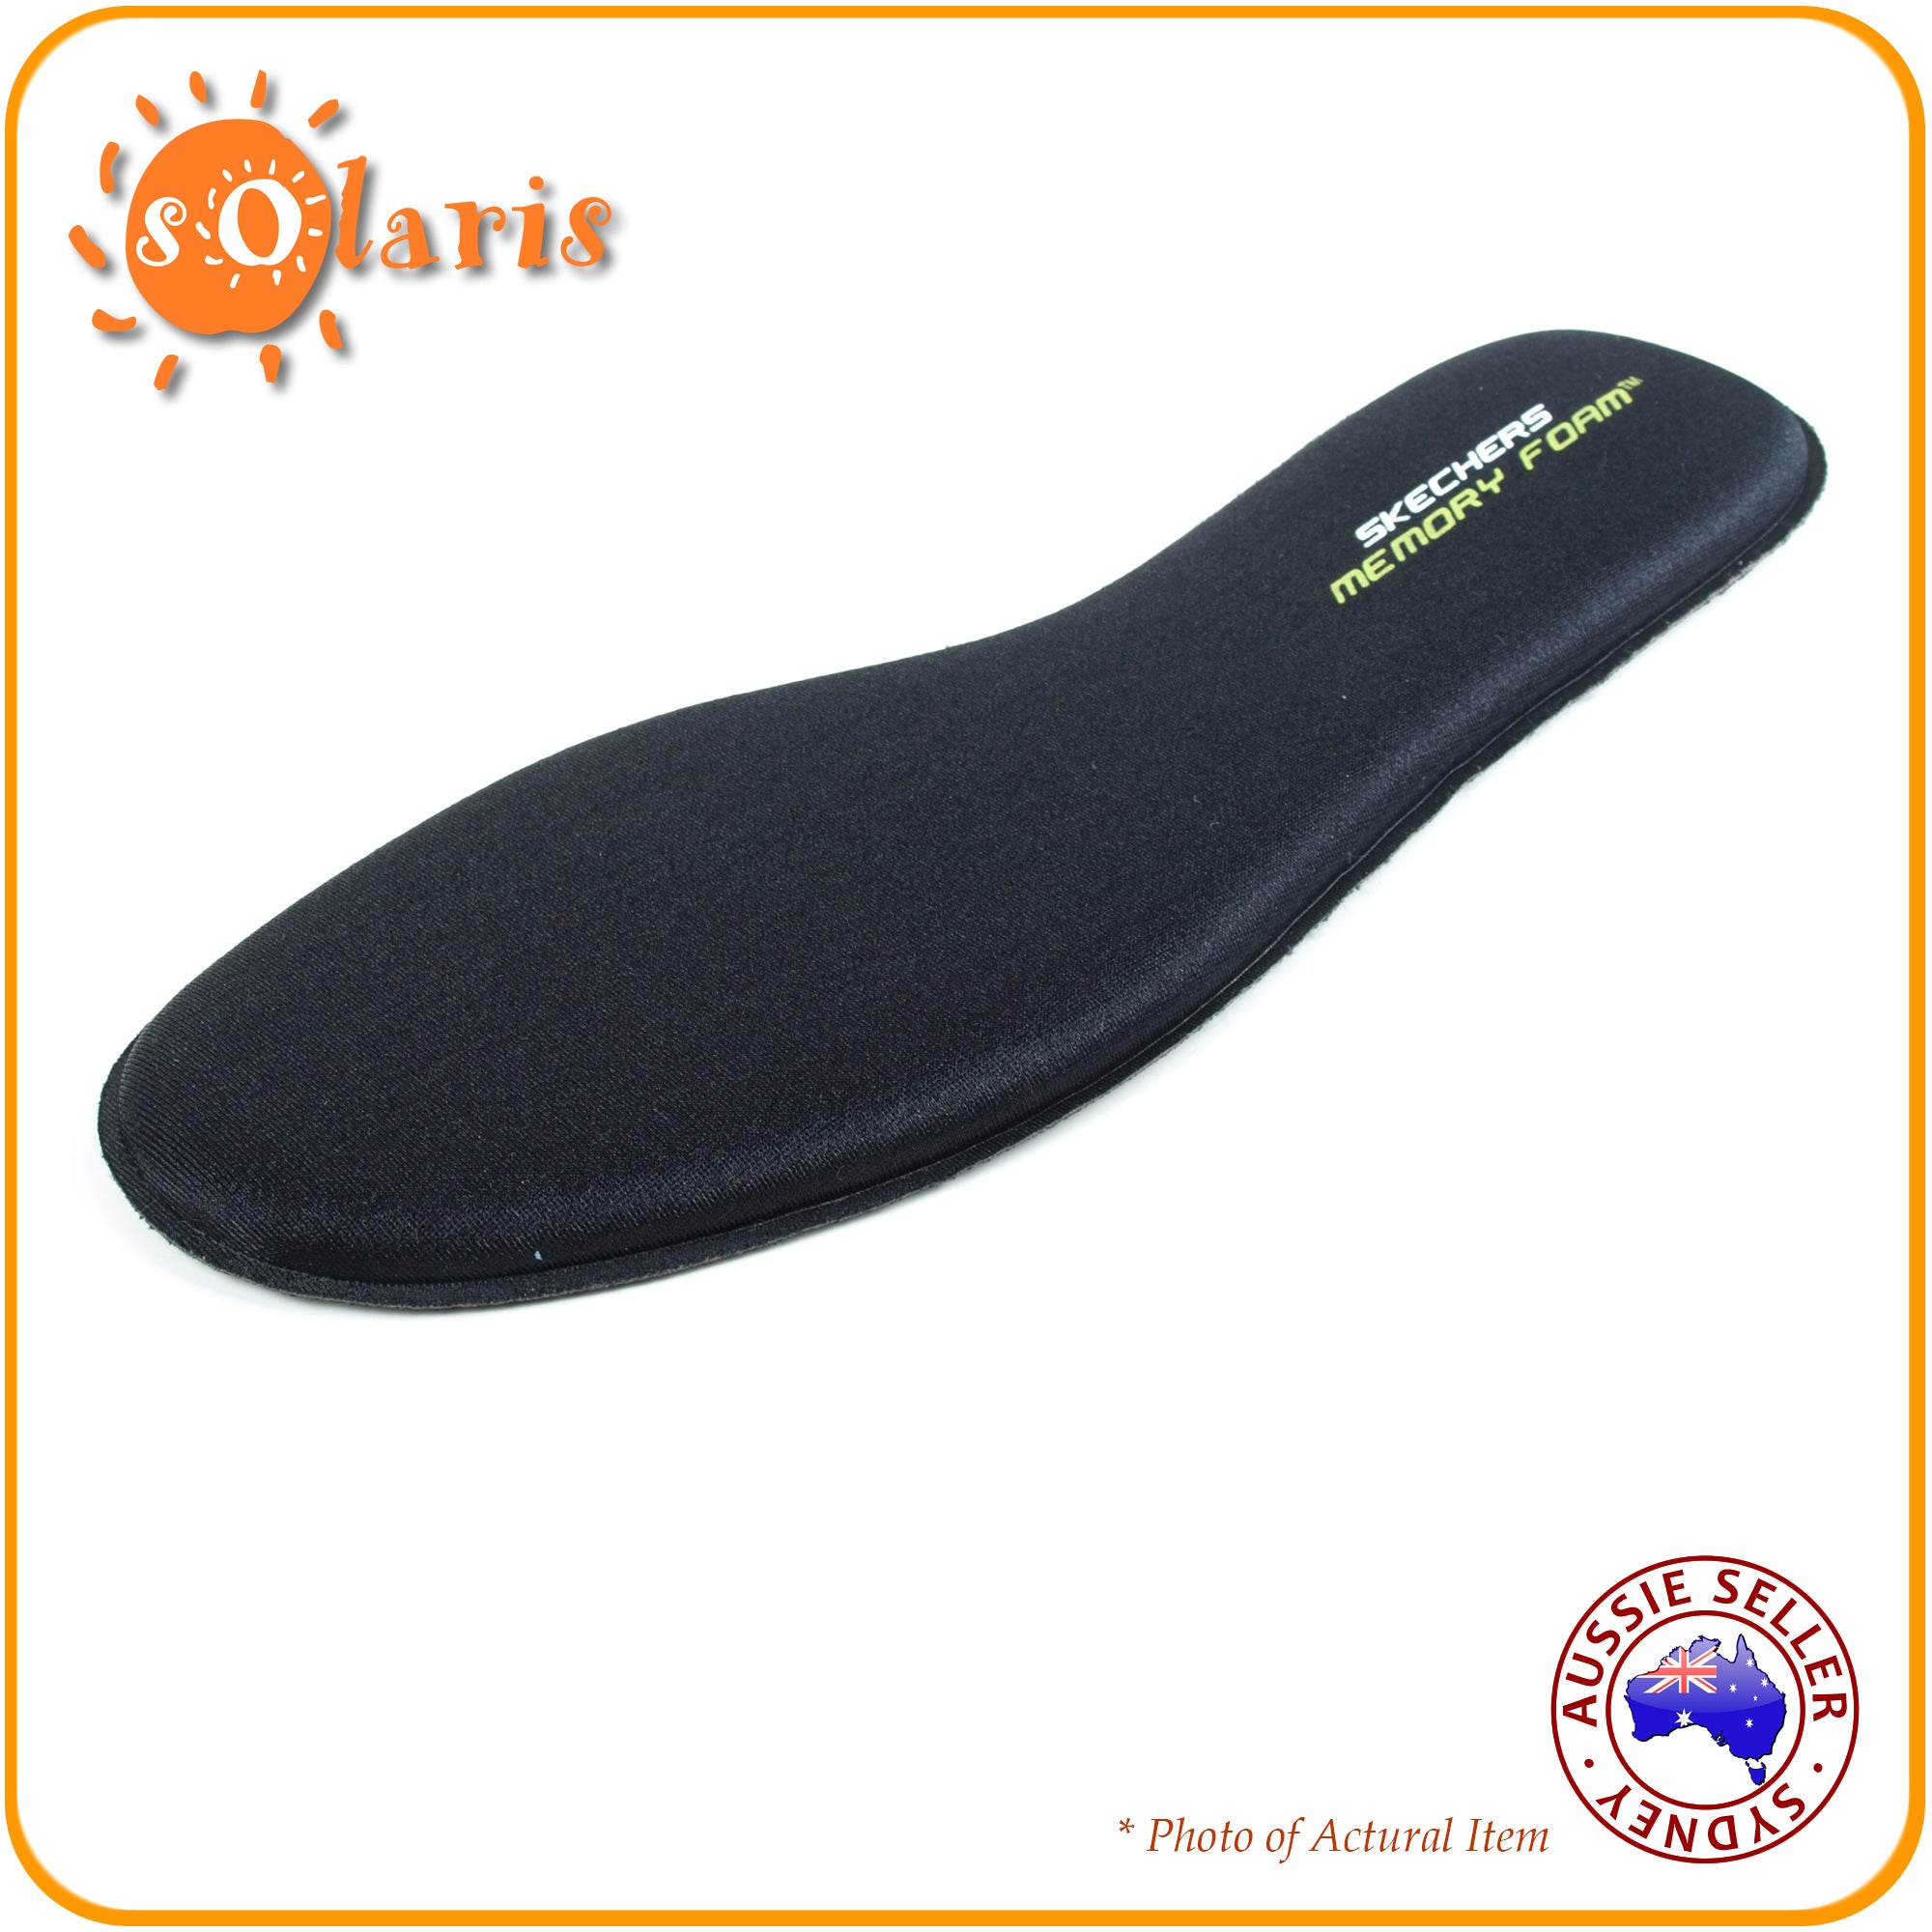 1x Pair SKECHERS Memory Foam Flat Insoles Super Comfy Replacement Inso – Solaris & Leisure